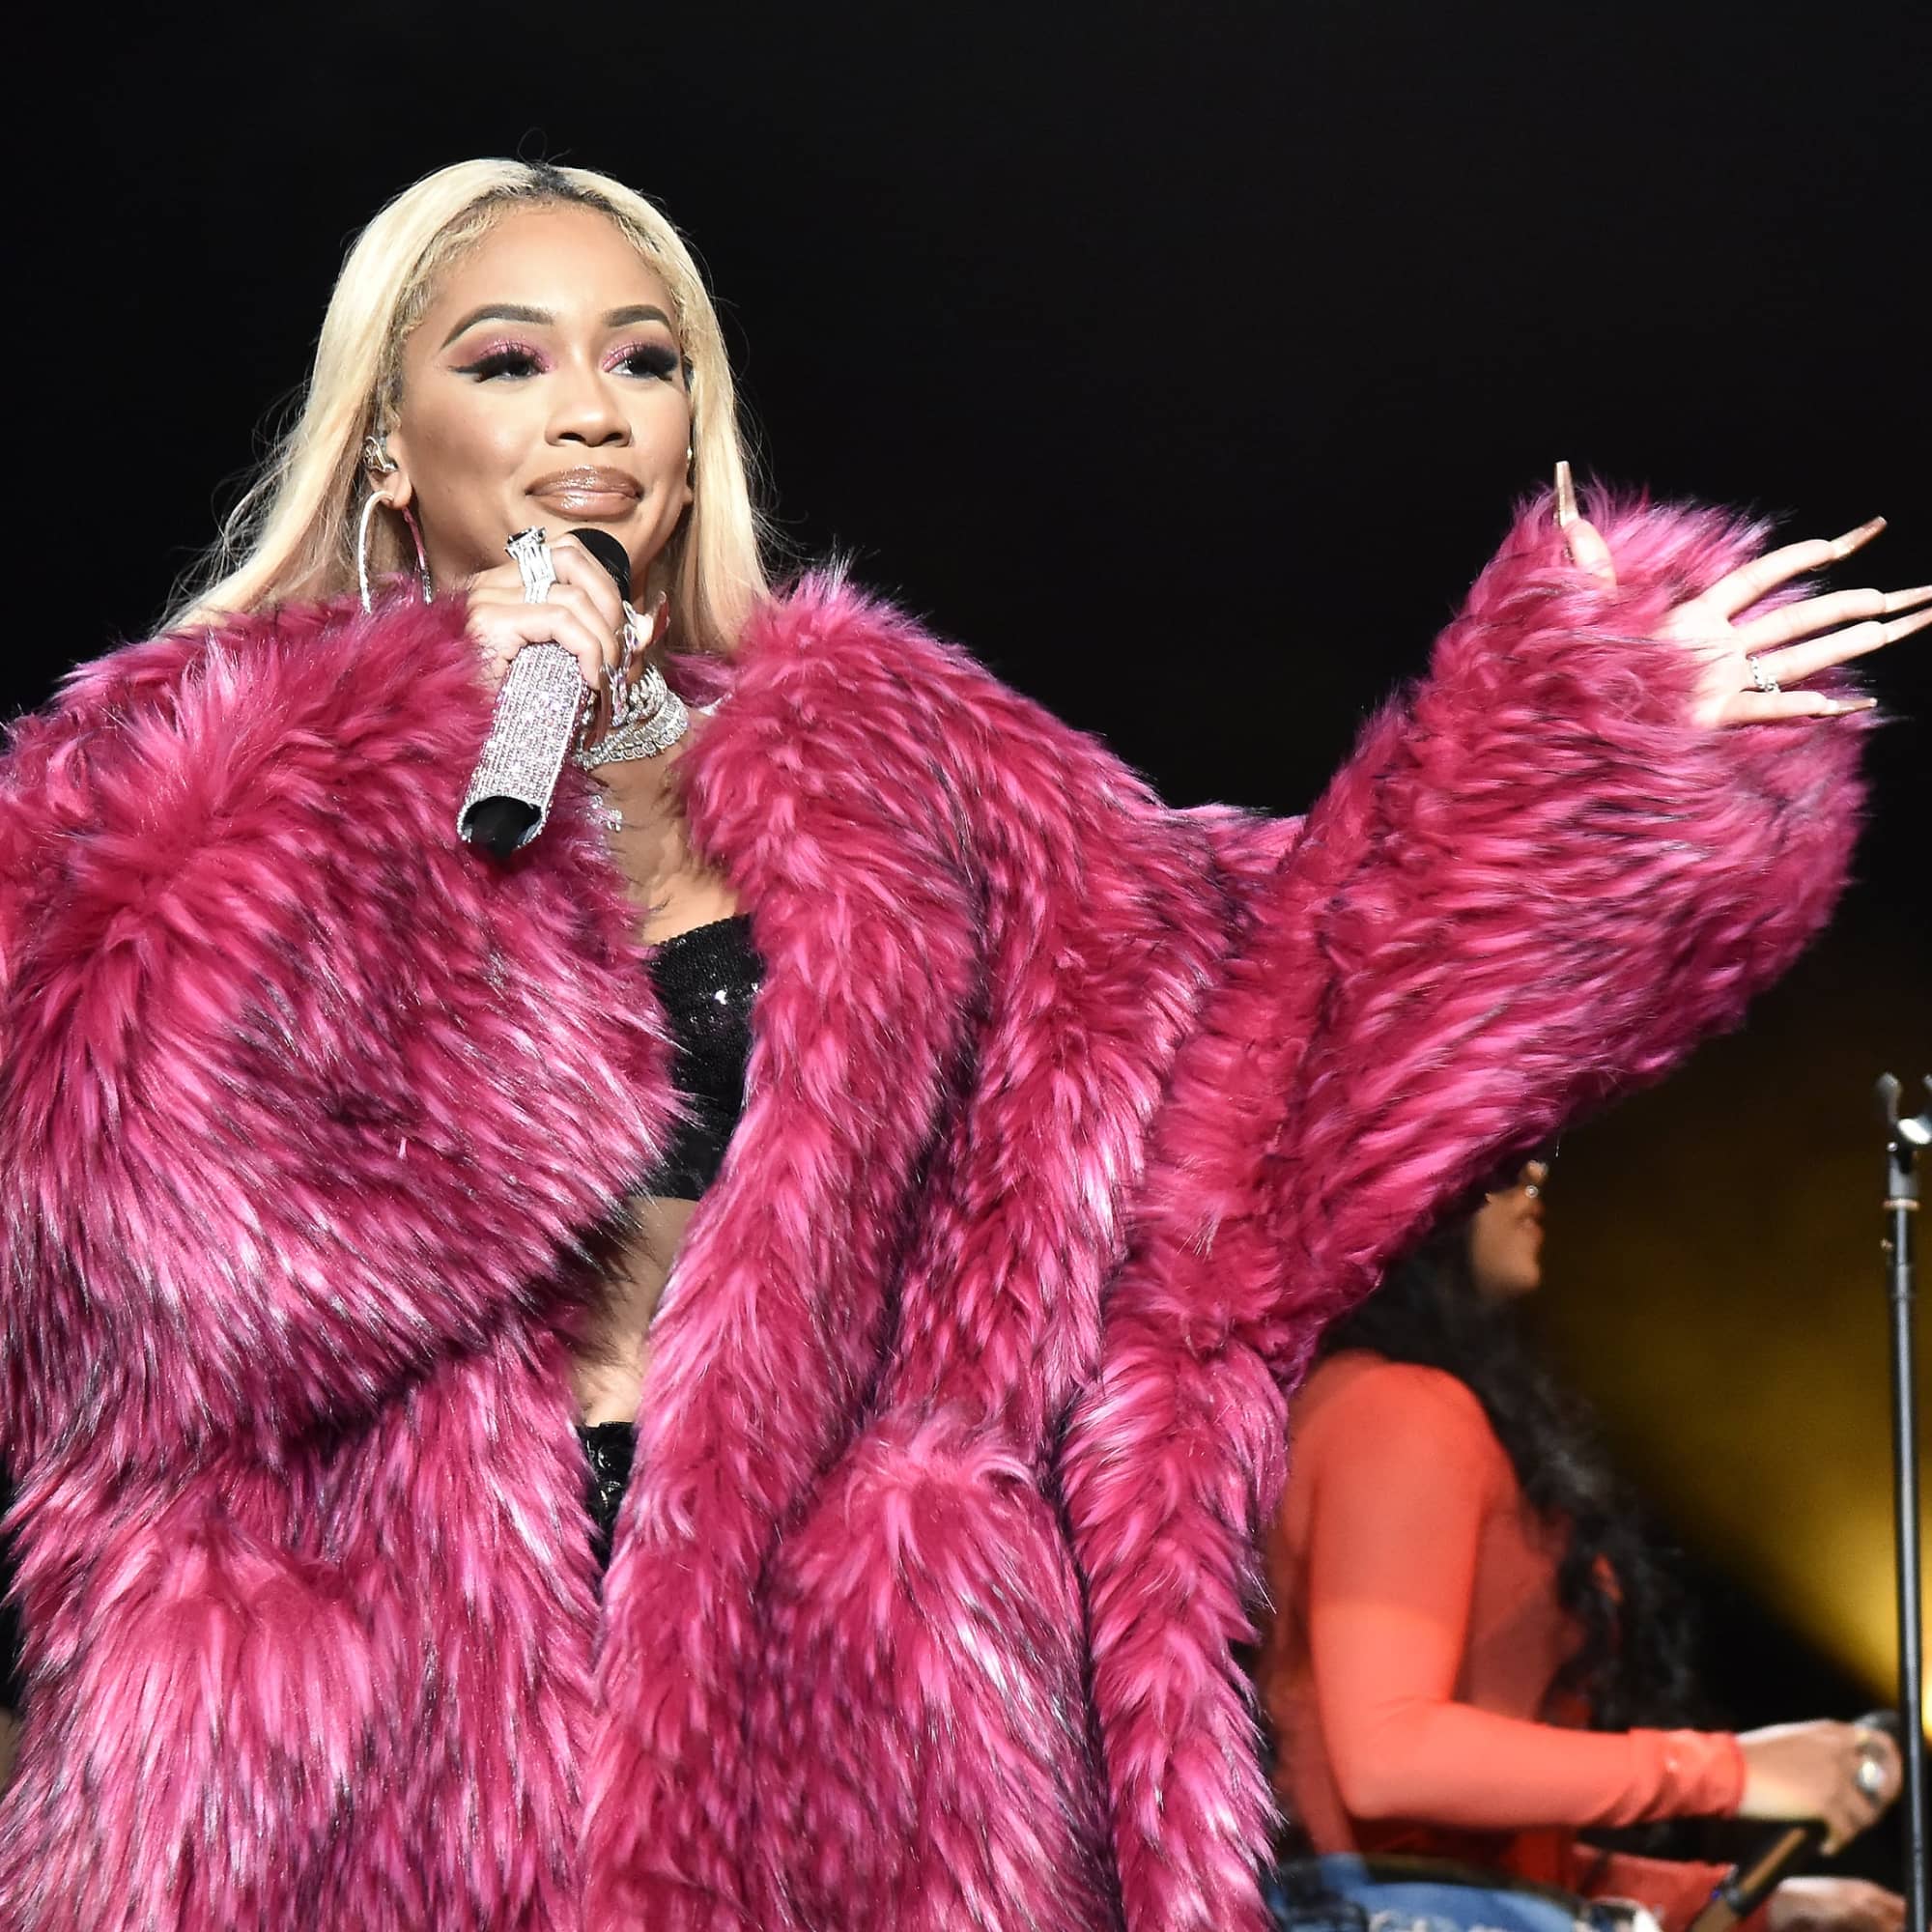 Saweetie’s Birth Chart Proves That Music Was Always Meant to Be Her